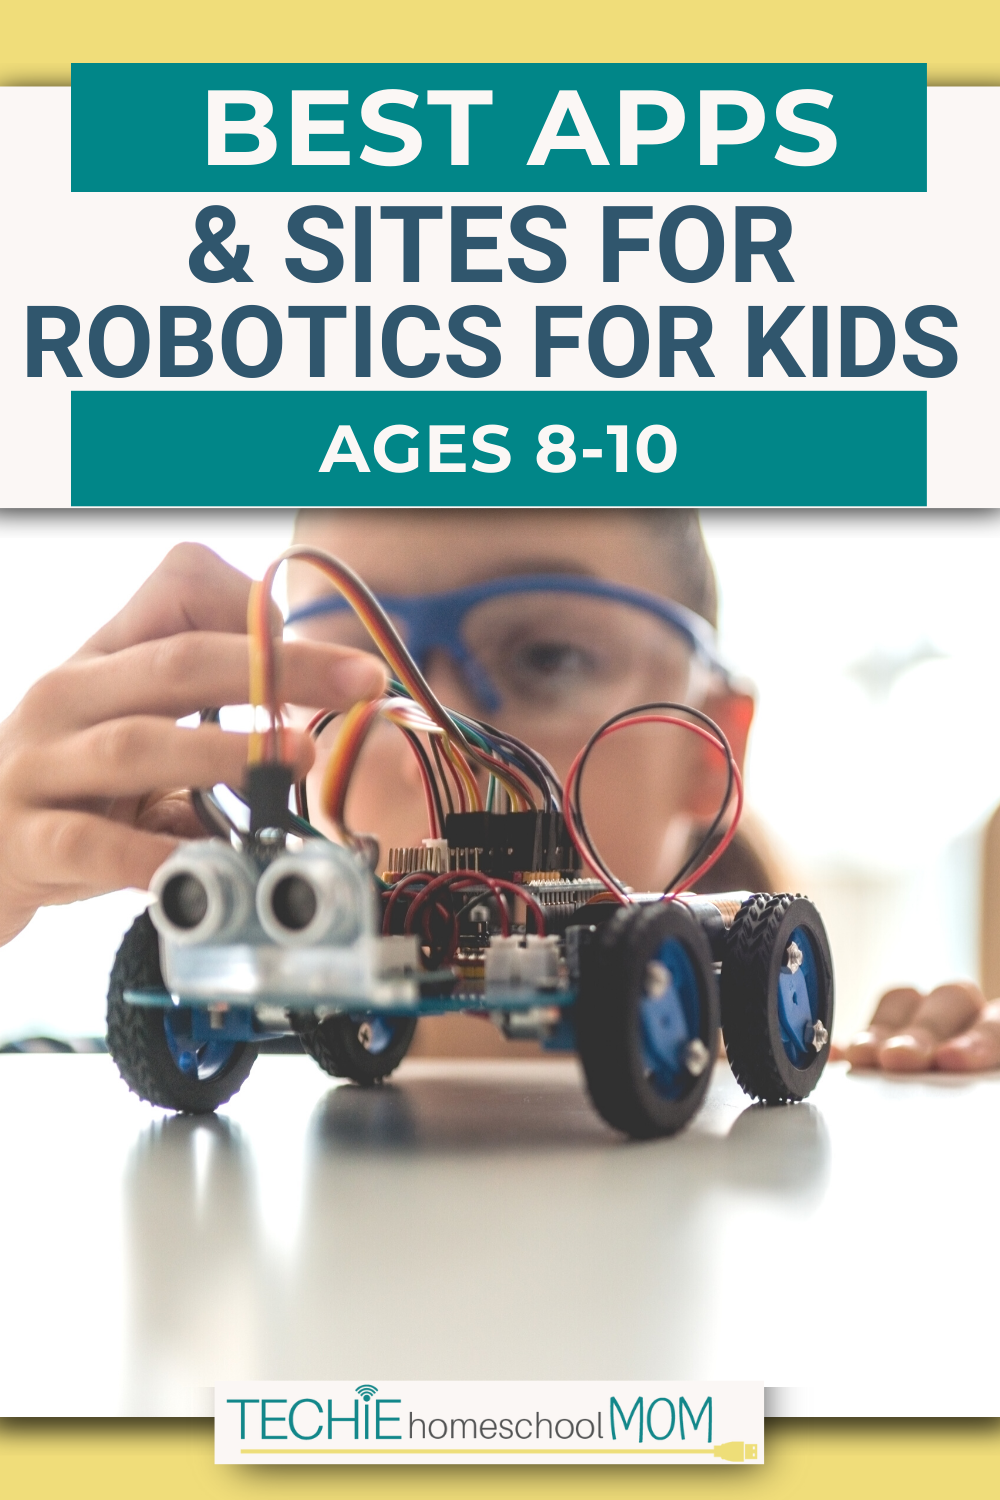 Best apps and sites for robotics for kids ages 8-10.